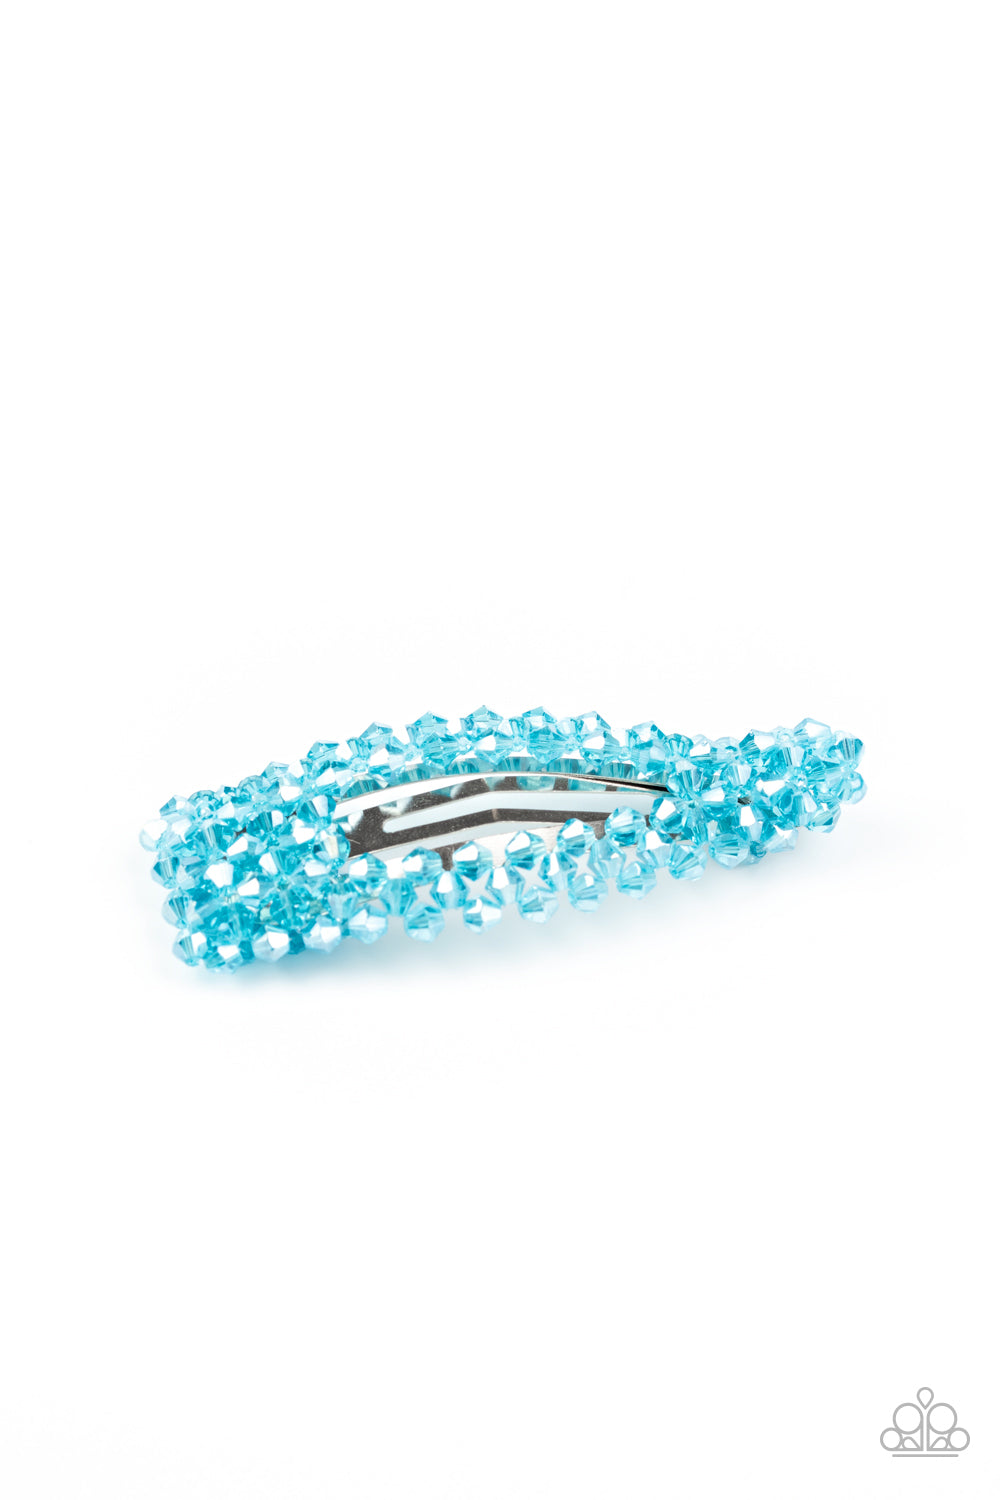 &lt;P&gt; Faceted blue crystal-like beads bedazzle the front of a silver hair clip, creating a glittering piece. Features a standard snap hair clip on the back.&lt;/P&gt;

&lt;P&gt;&lt;I&gt;Sold as one individual hair clip.&lt;/I&gt;&lt;/P&gt;


&lt;img src=\&quot;https://d9b54x484lq62.cloudfront.net/paparazzi/shopping/images/517_tag150x115_1.png\&quot; alt=\&quot;New Kit\&quot; align=\&quot;middle\&quot; height=\&quot;50\&quot; width=\&quot;50\&quot;/&gt;